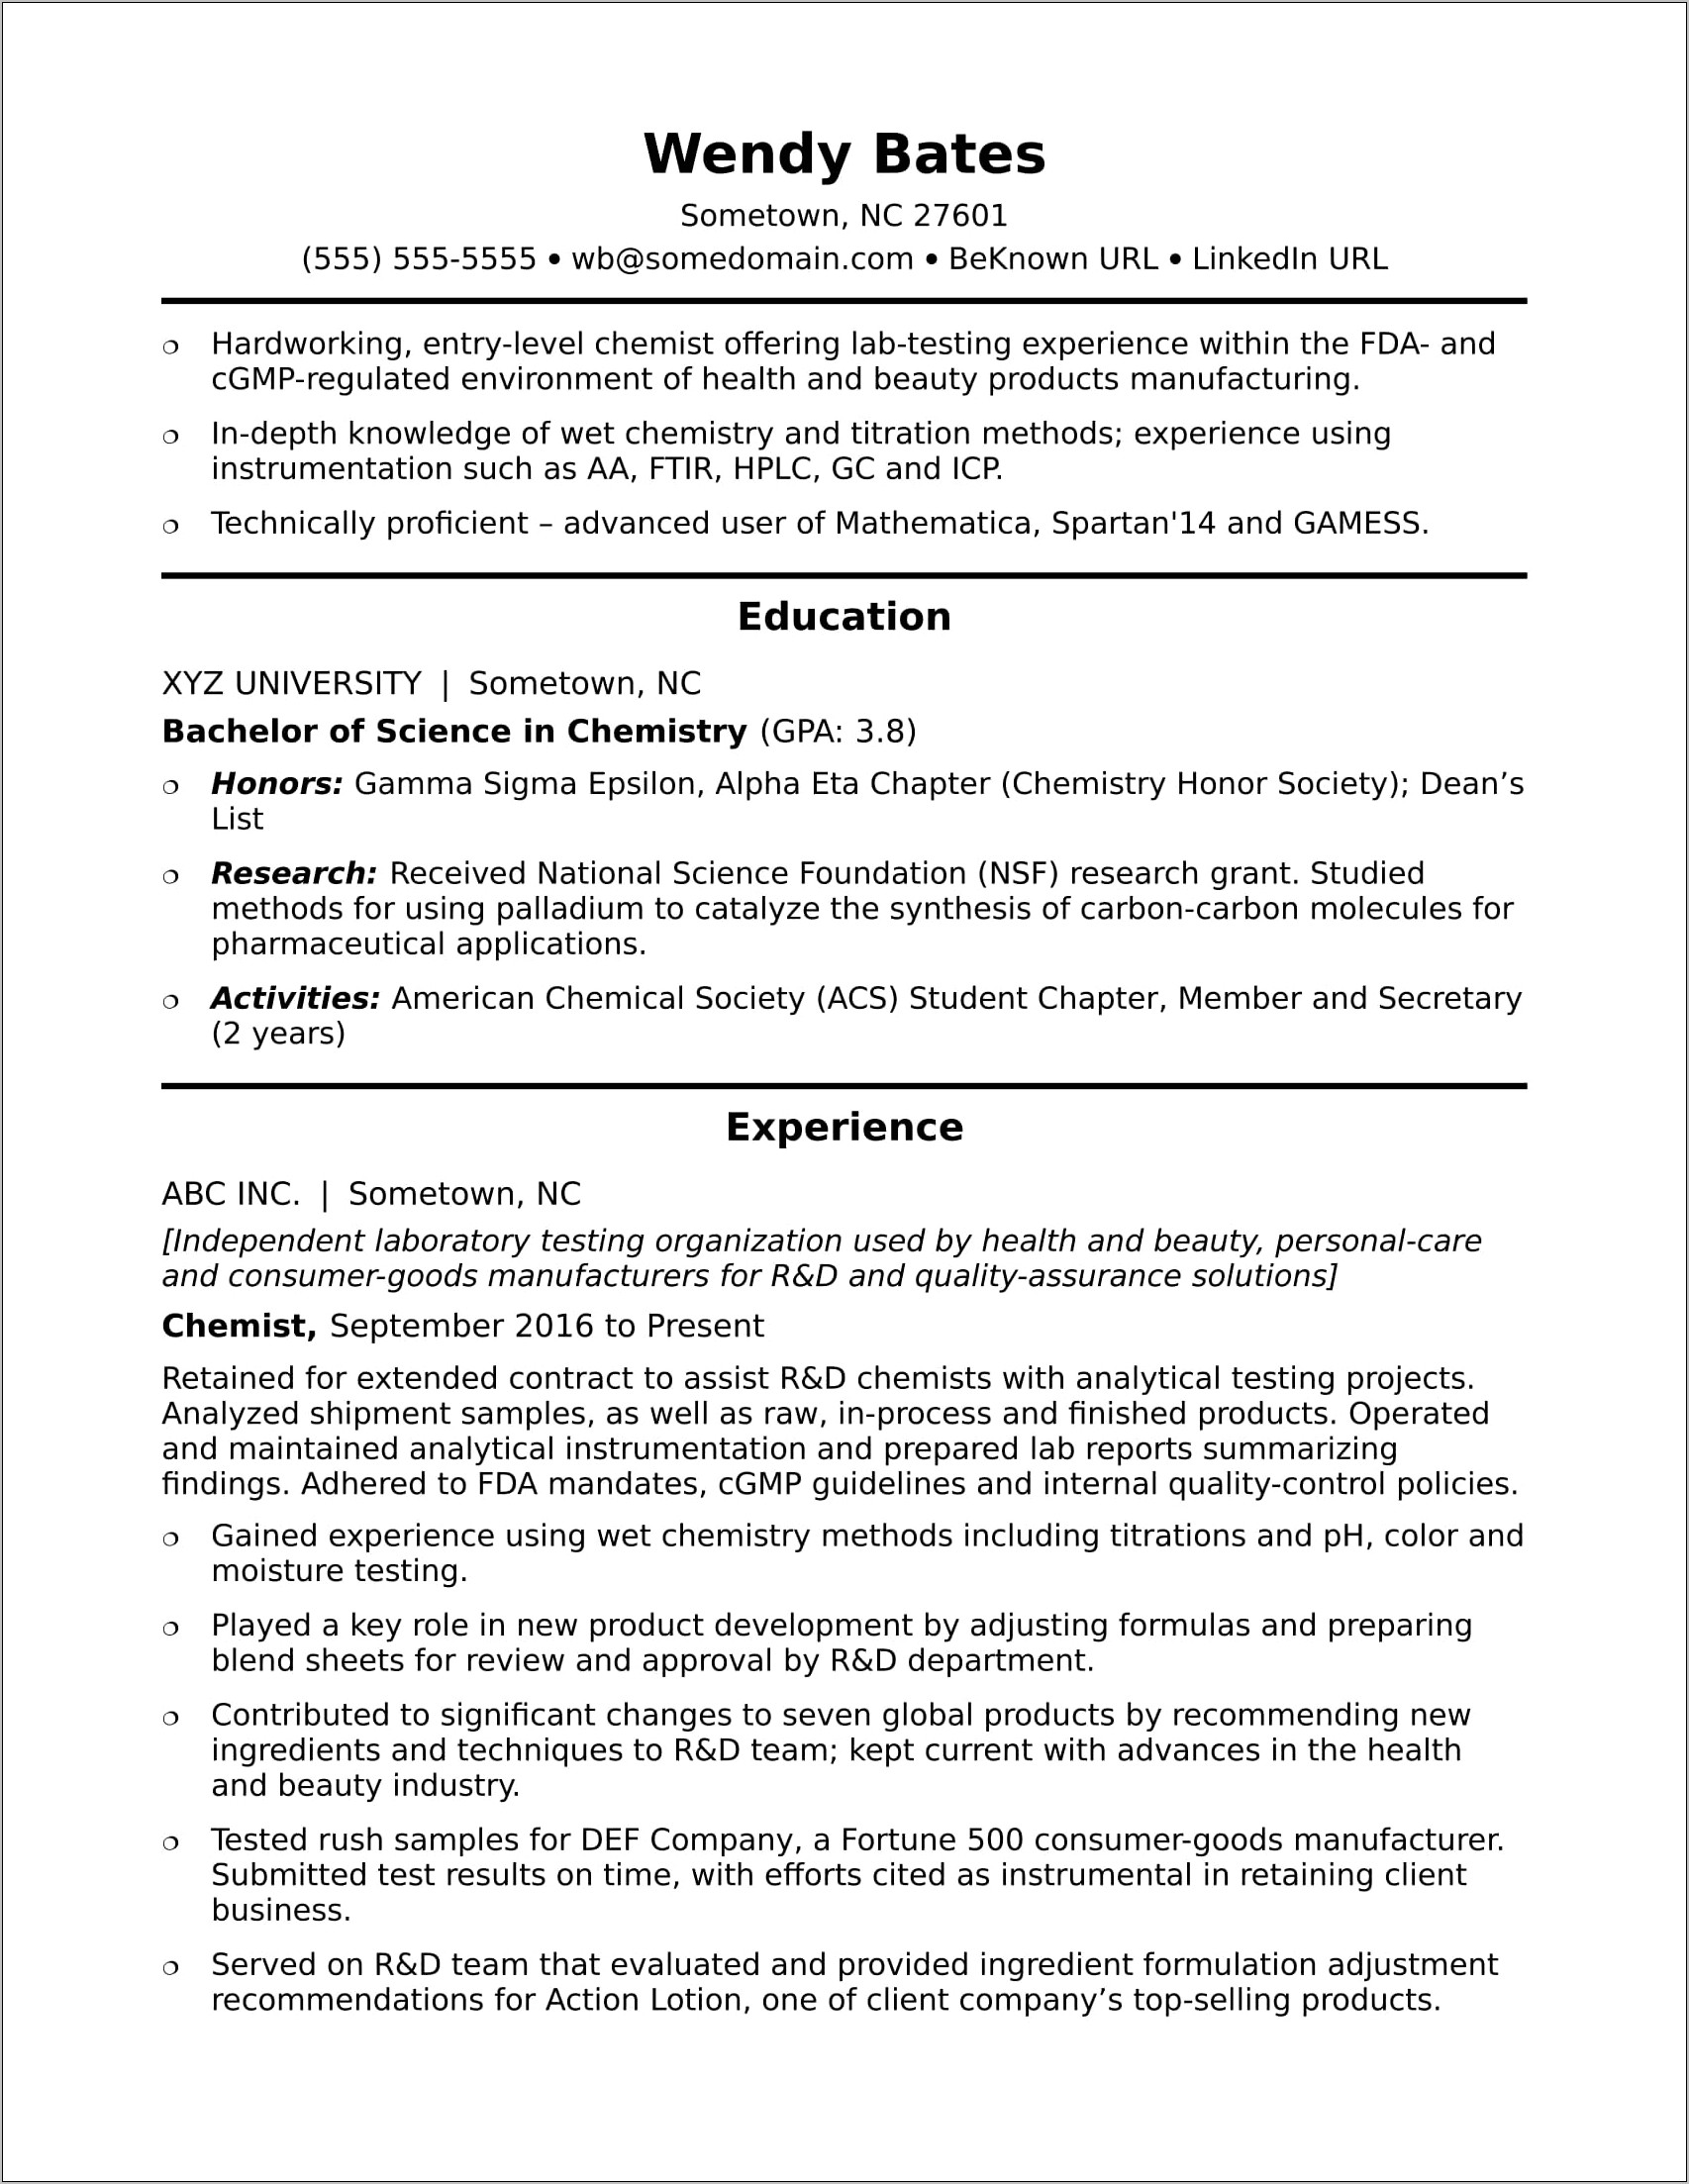 Resume Offering 14 Year's Experience